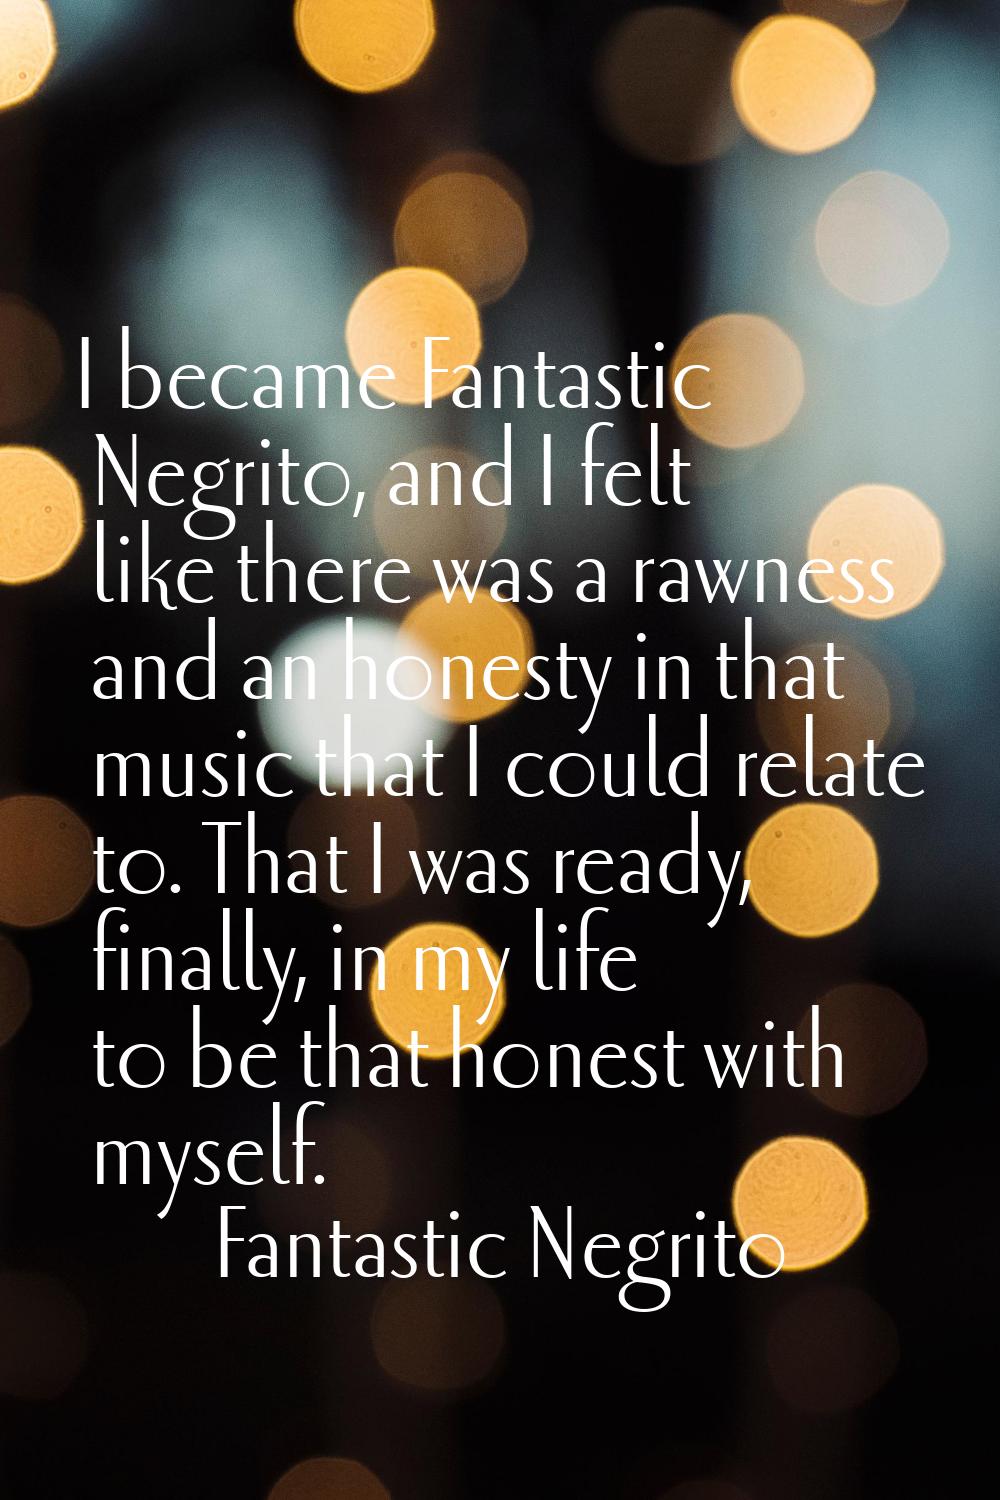 I became Fantastic Negrito, and I felt like there was a rawness and an honesty in that music that I